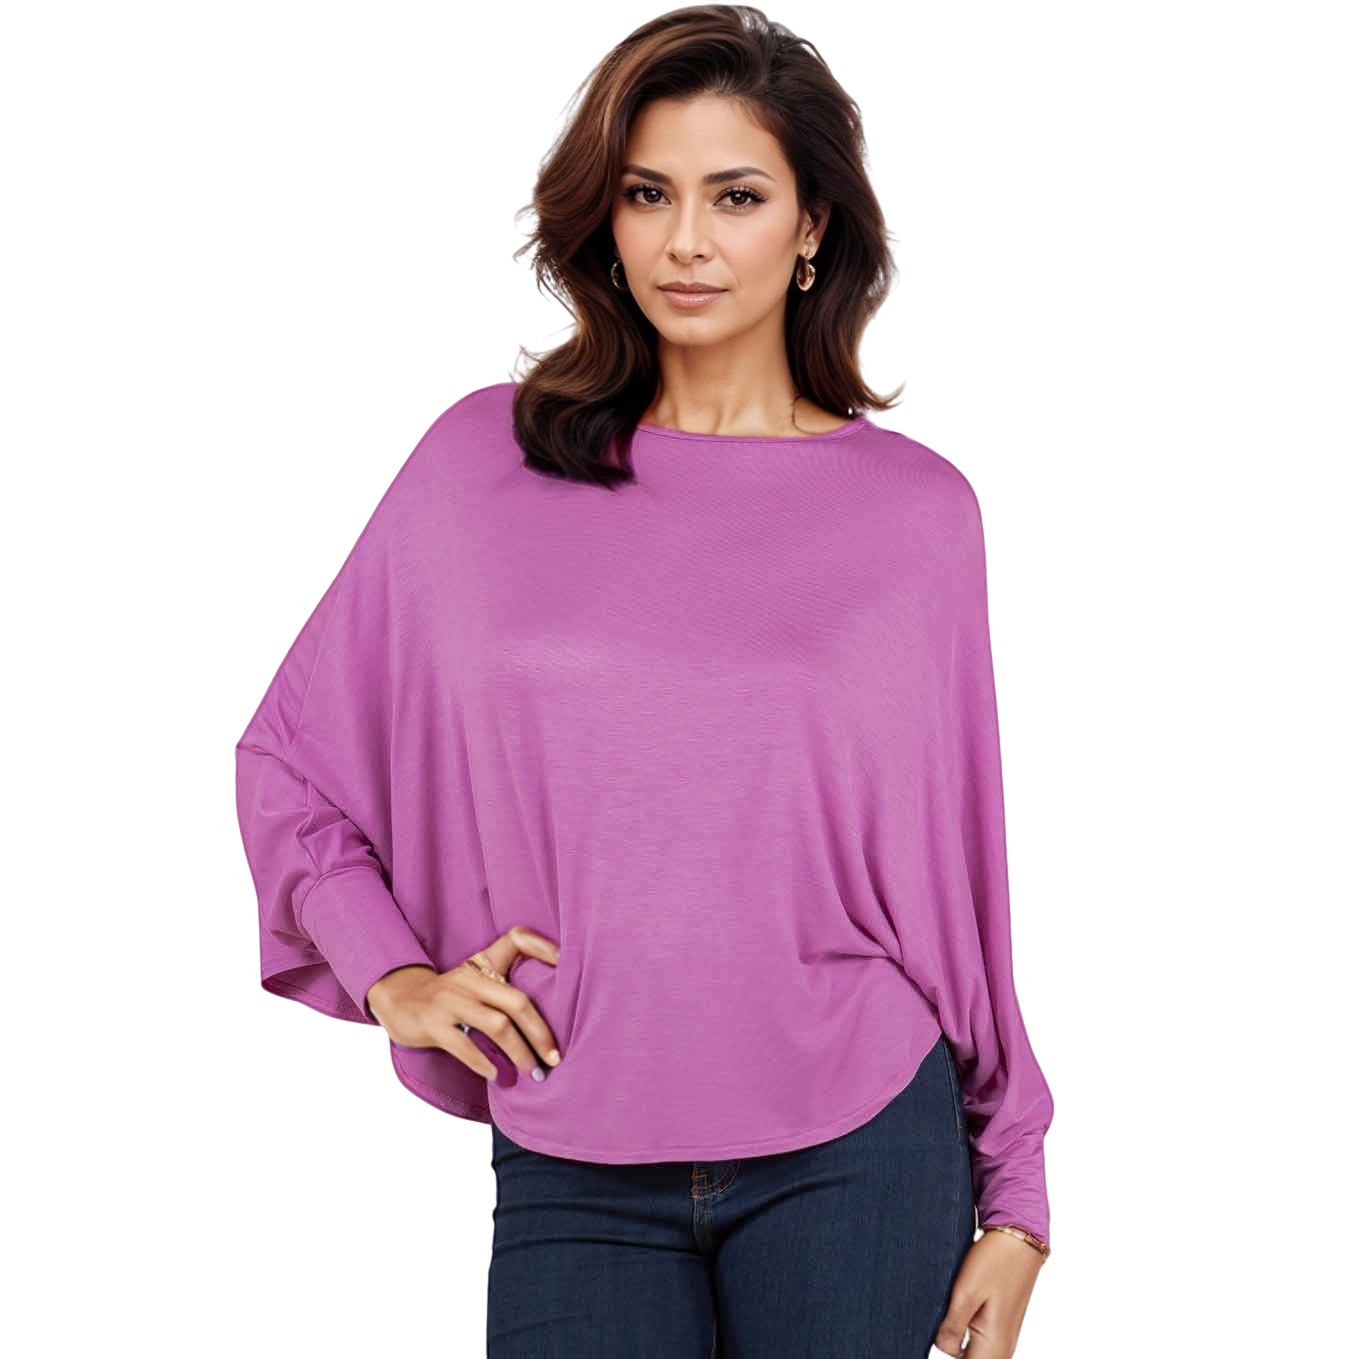 1818 - Raspberry<br>
Poncho with Sleeves